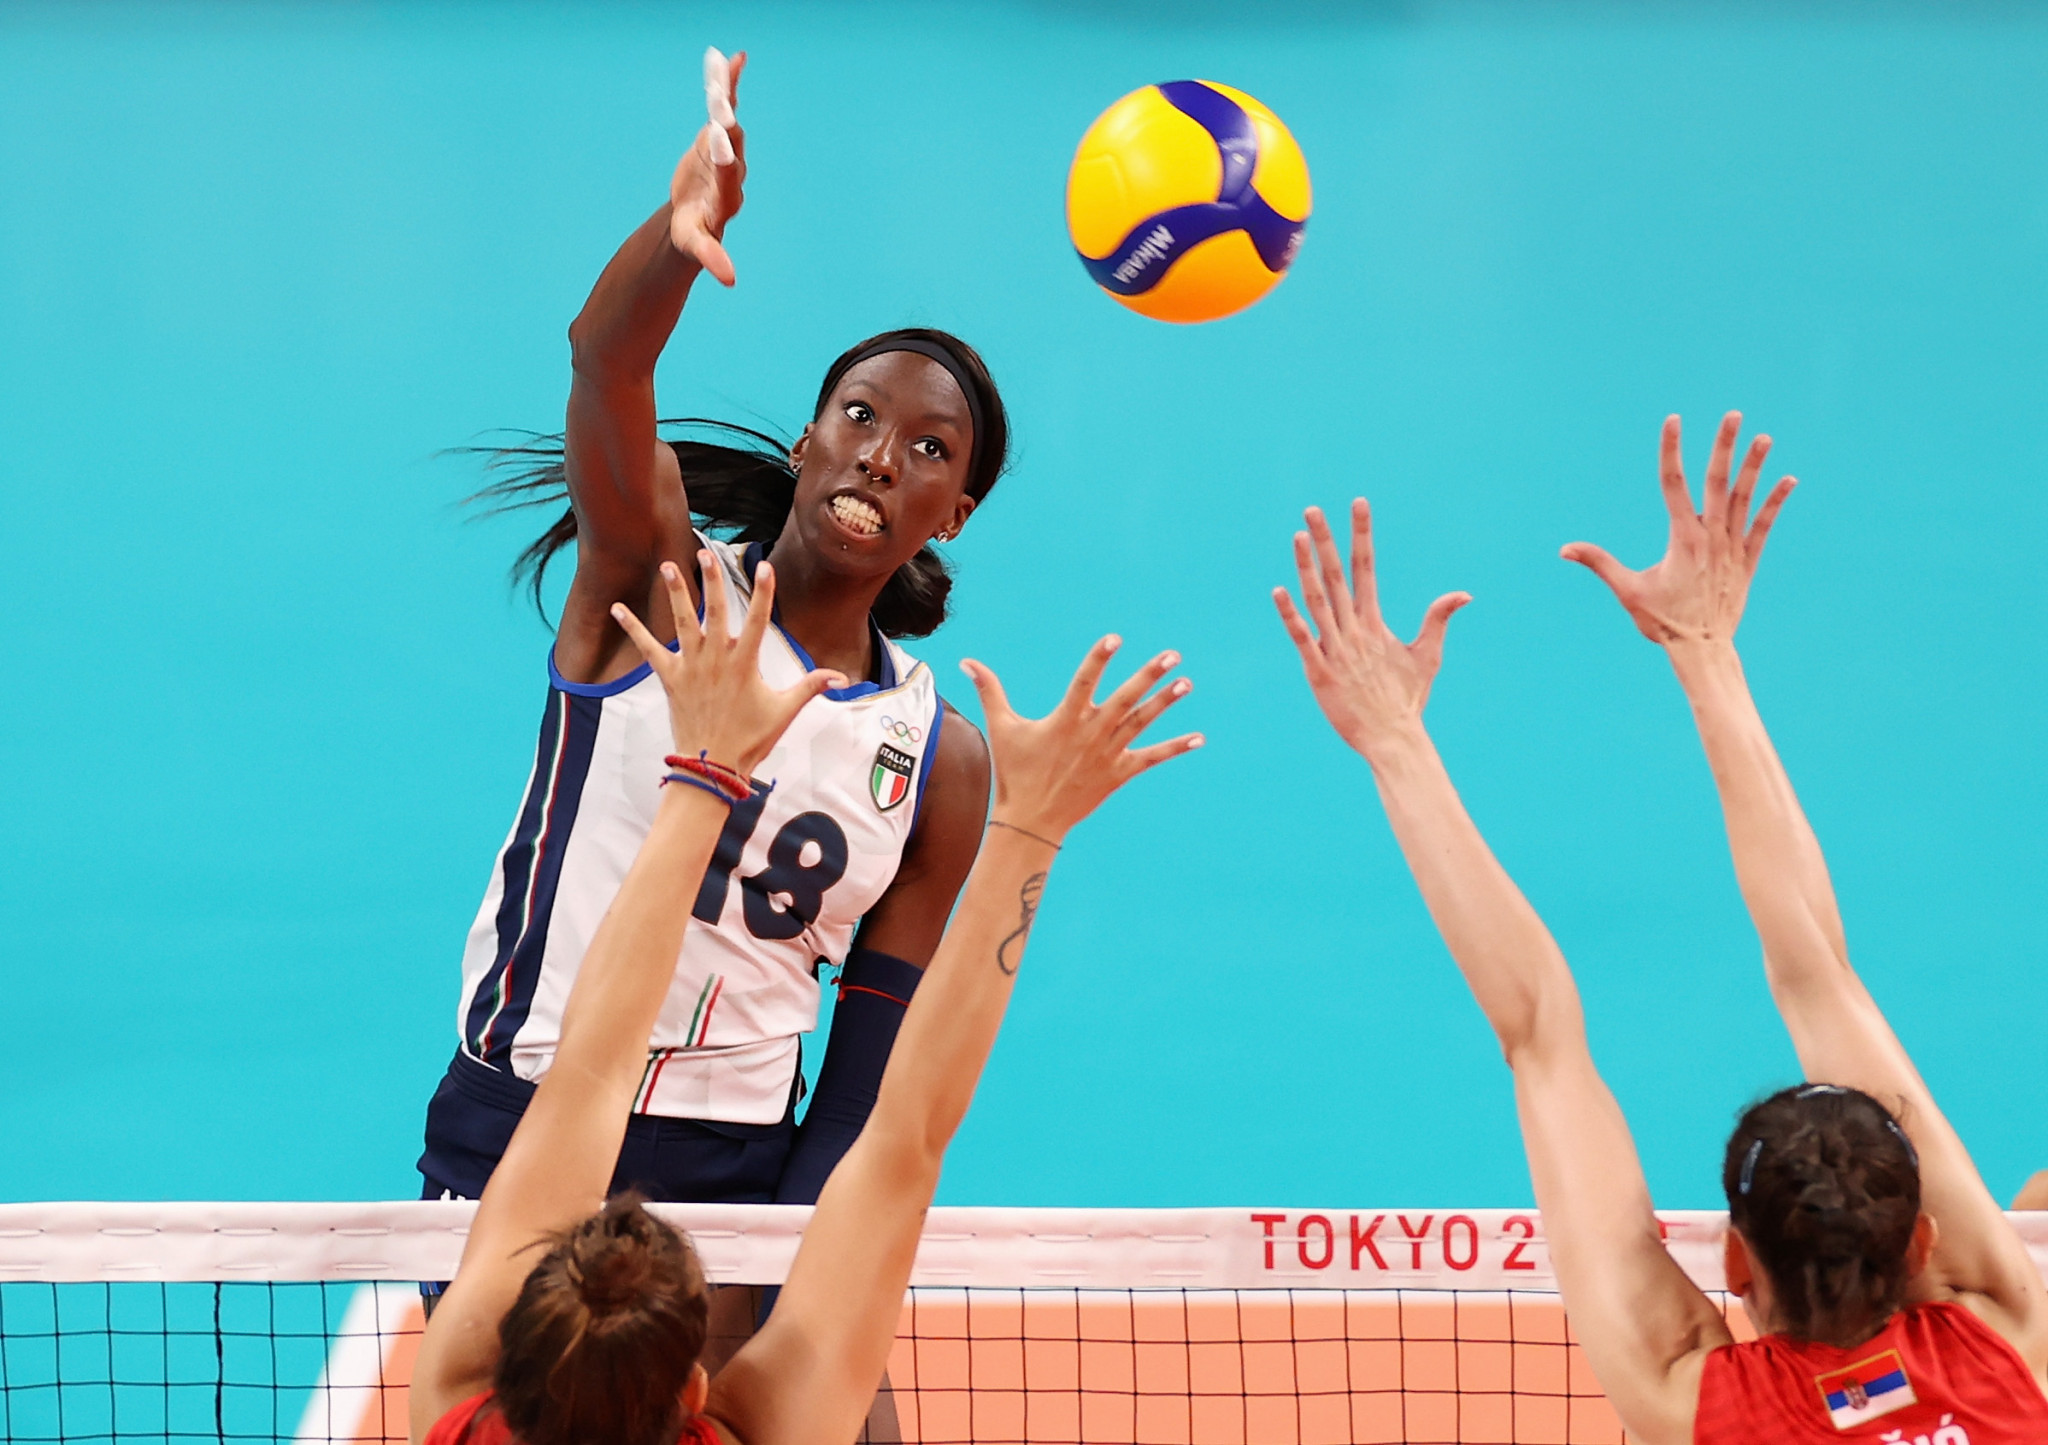 Italy's Paola Egonu top scored in the final with 29 points, and was named the tournament's most valuable player ©Getty Images